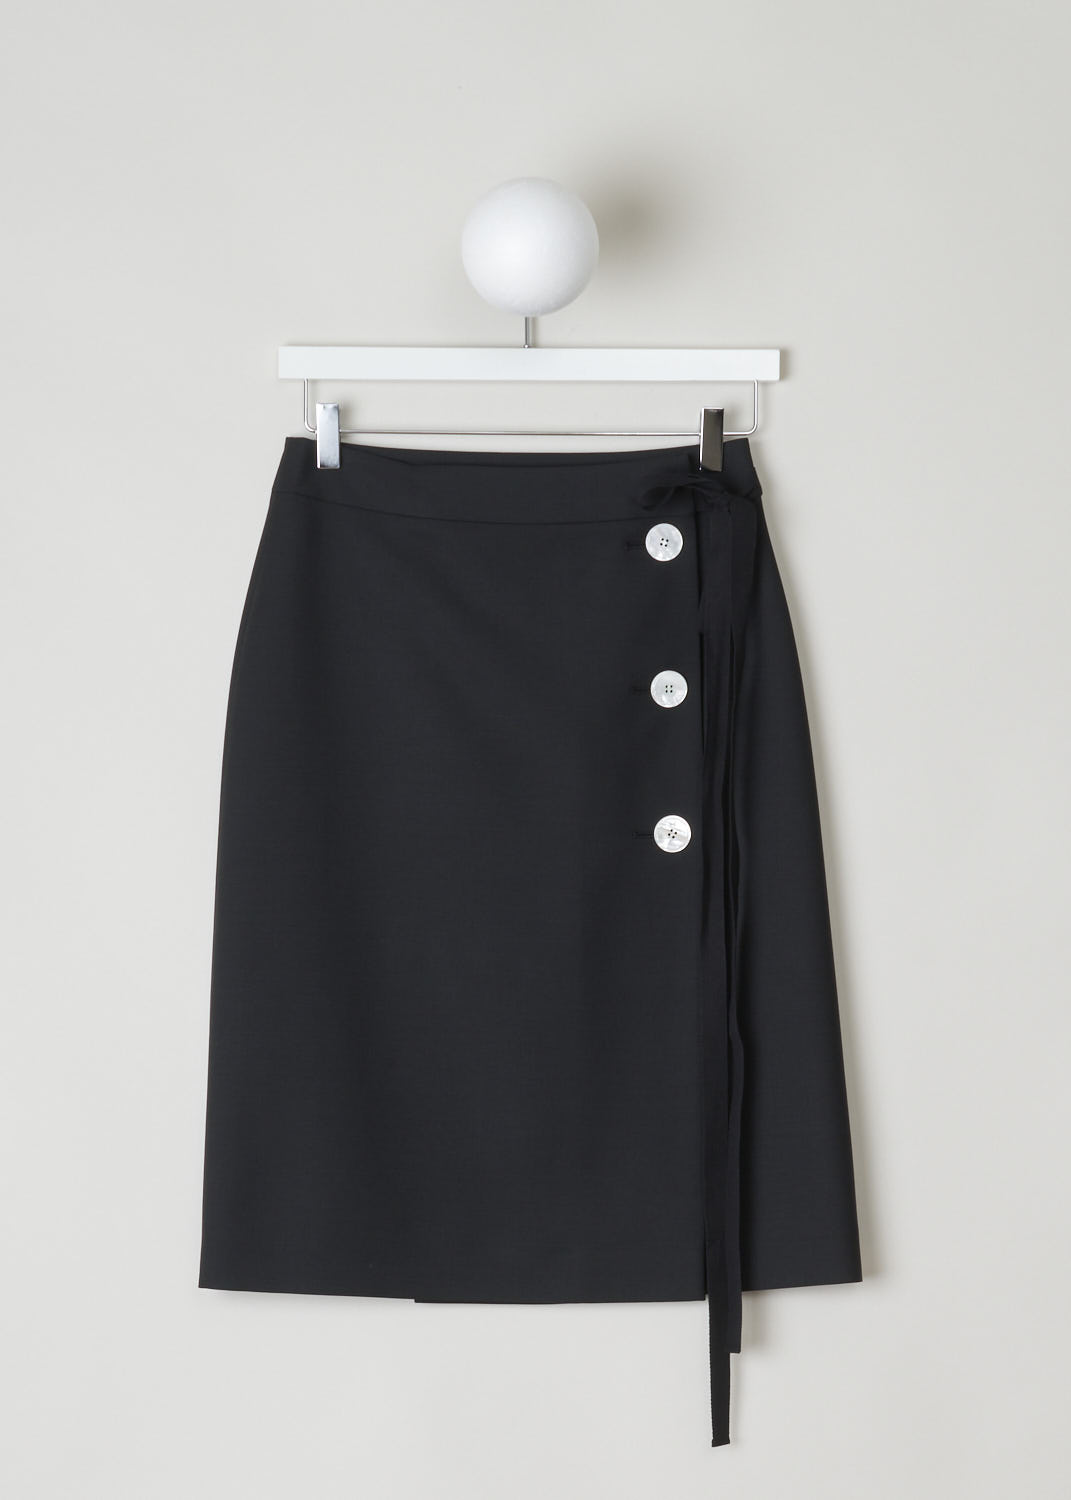 PRADA, BLACK WRAP SKIRT WITH BUTTONS AND TIE DETAIL, 
KID_MOHAIR_P122R_NERO, Black, Front, Black wrap skirt with three contrasting mother-of-pearl buttons on the side. Above the buttons, a black ribbon tie detail can be found. Both the buttons and the tie function as the closure option, as well as a concealed button and hook on the inside. 